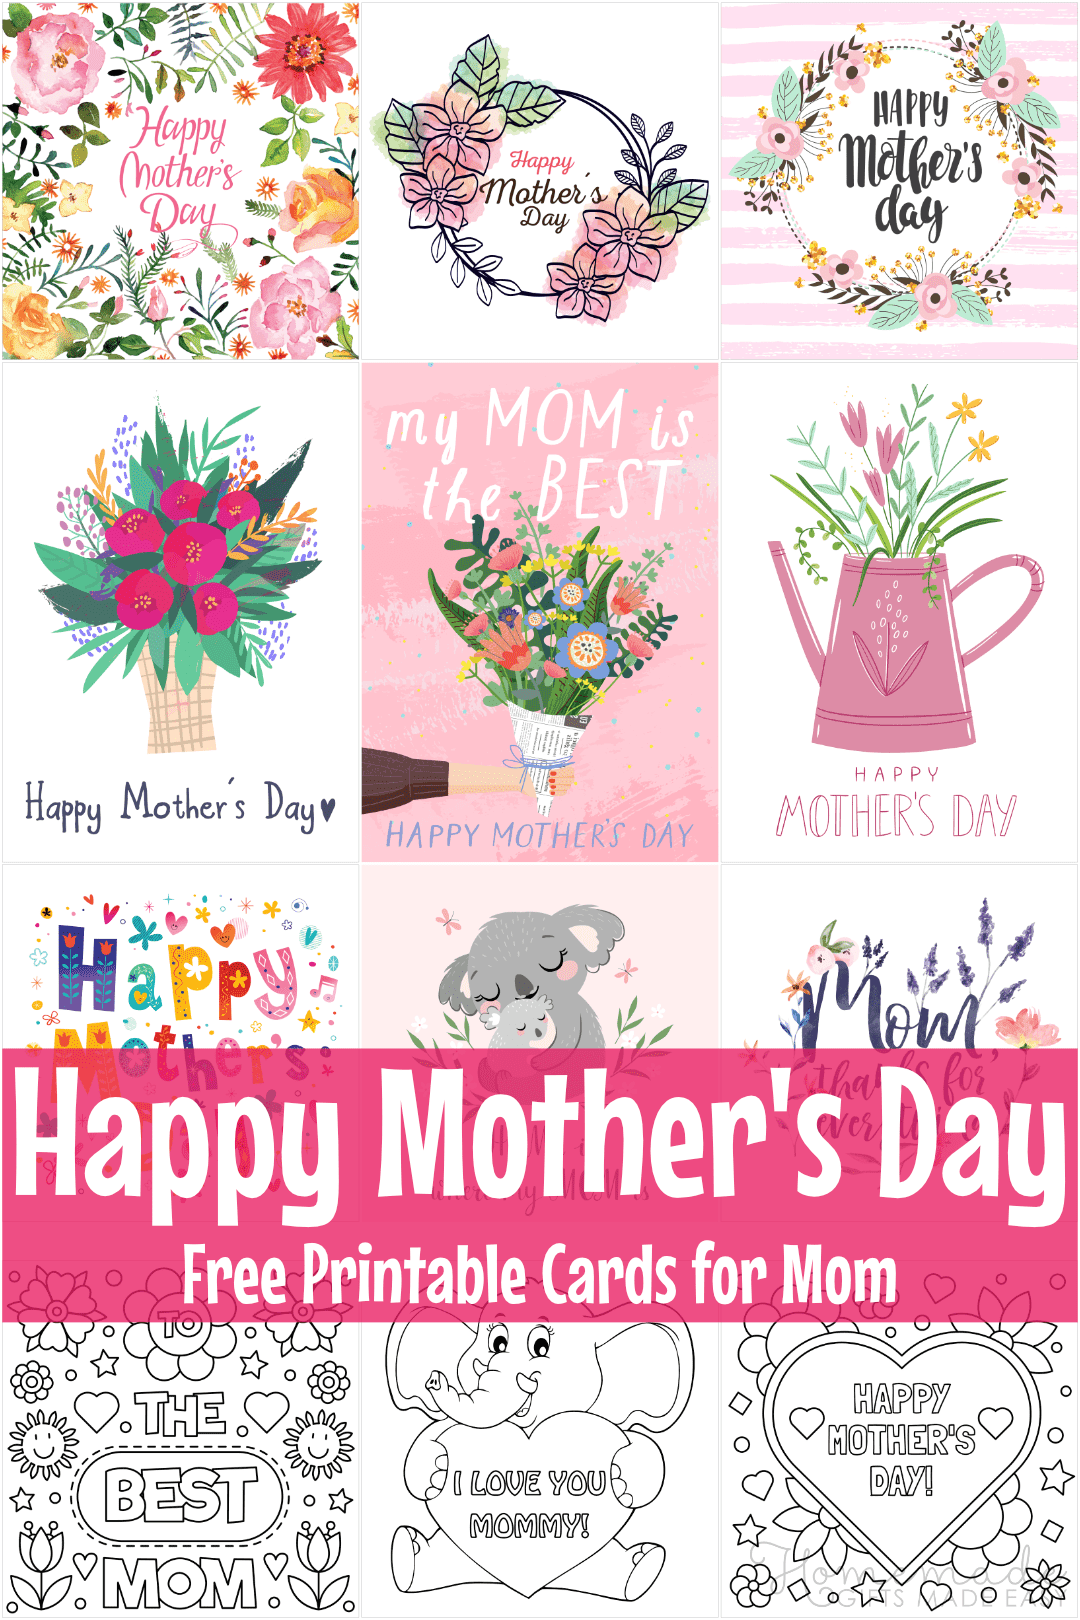 12 Lovely Printable Mother s Day Cards To Give Your Mom Complete With 